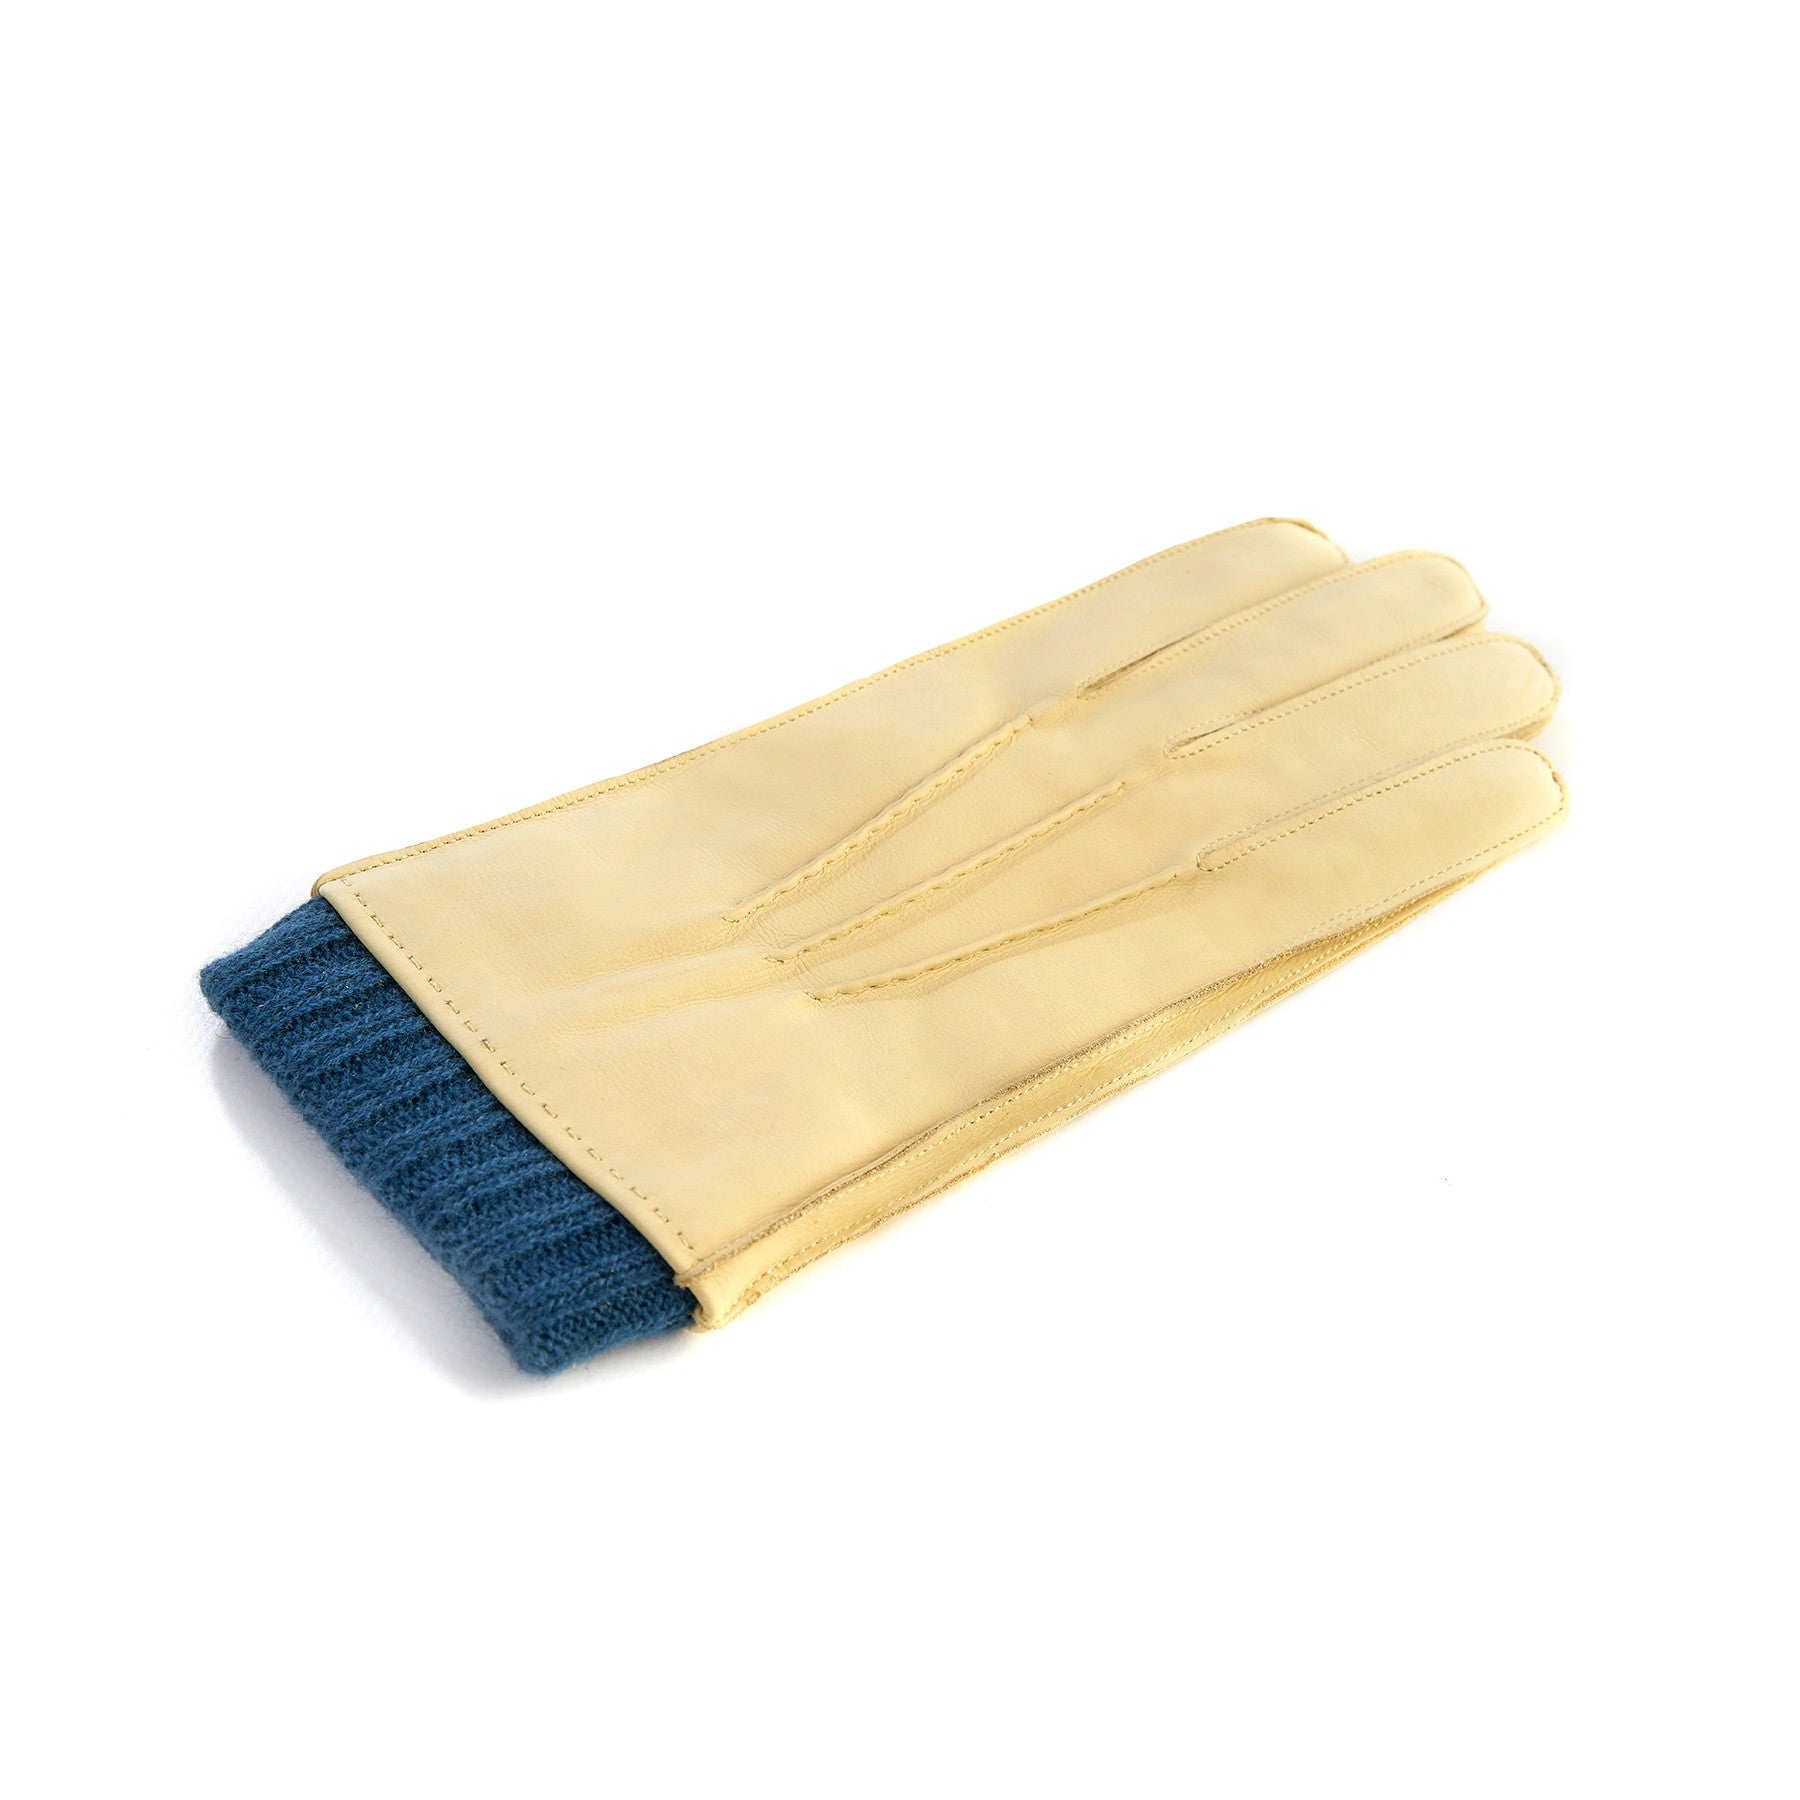 Men's pale yellow nubuk gloves with petrol cashmere lining with cuff